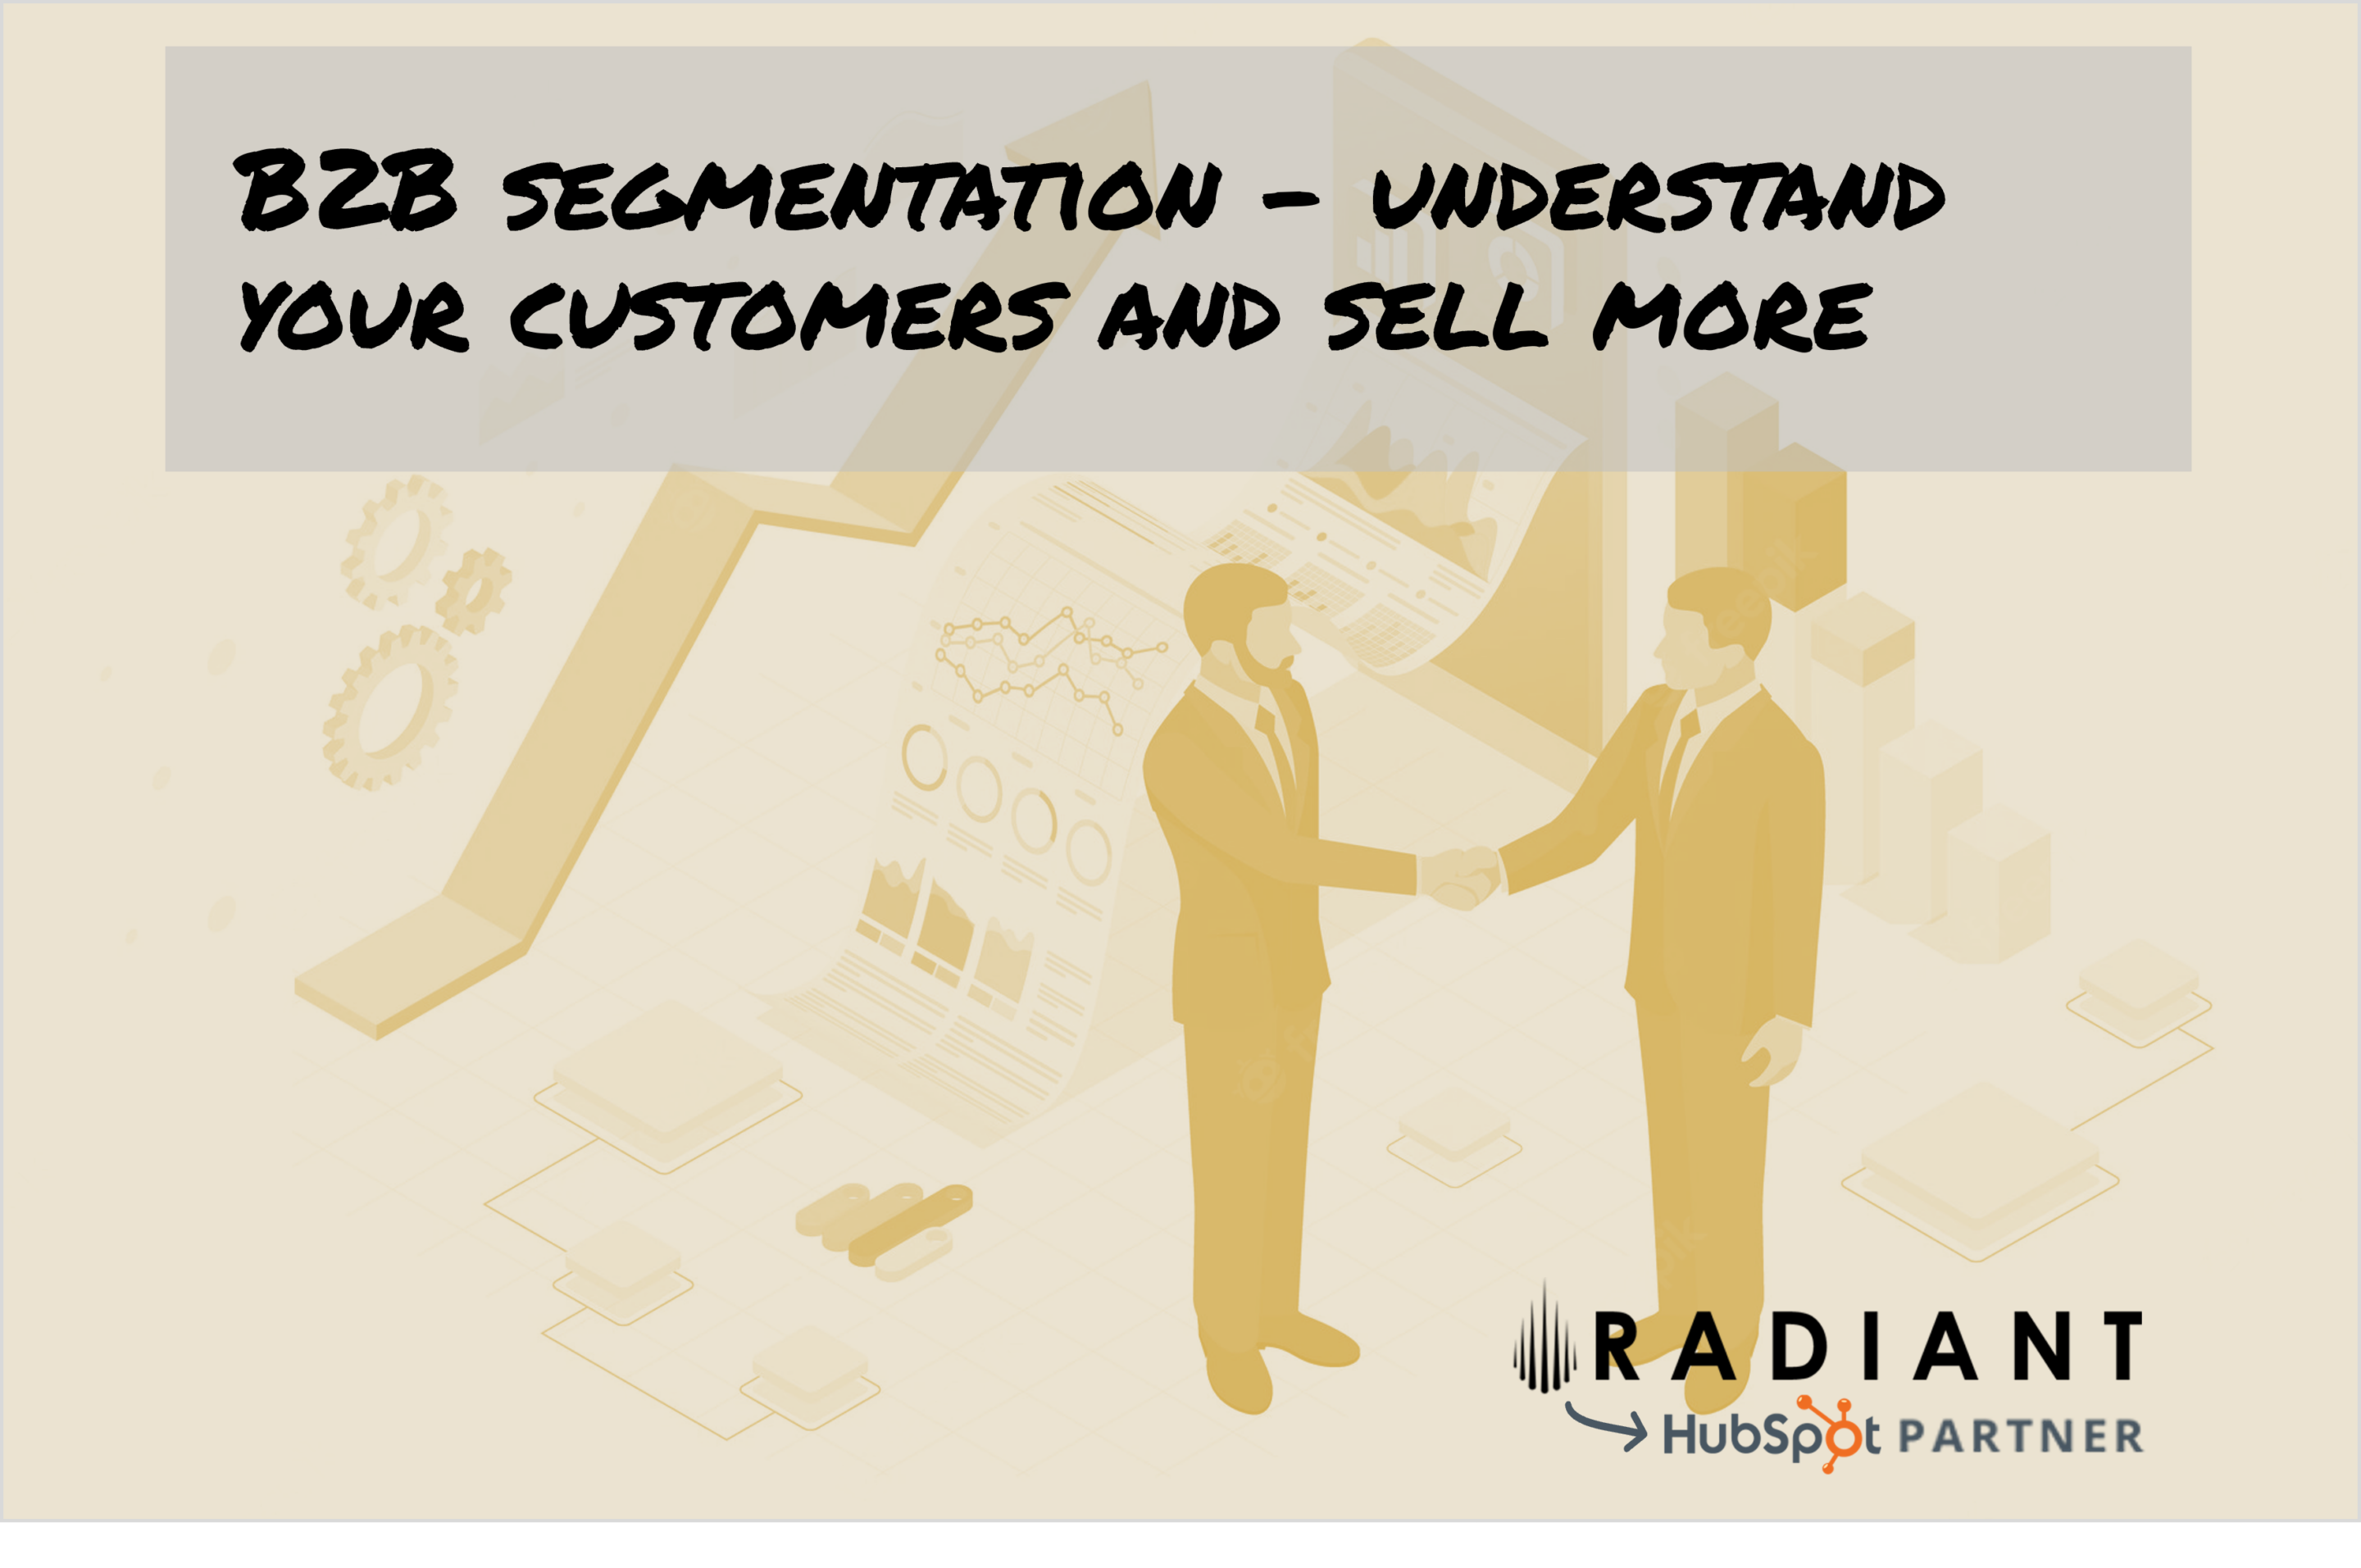 B2B segmentation – understand your customers and sell more